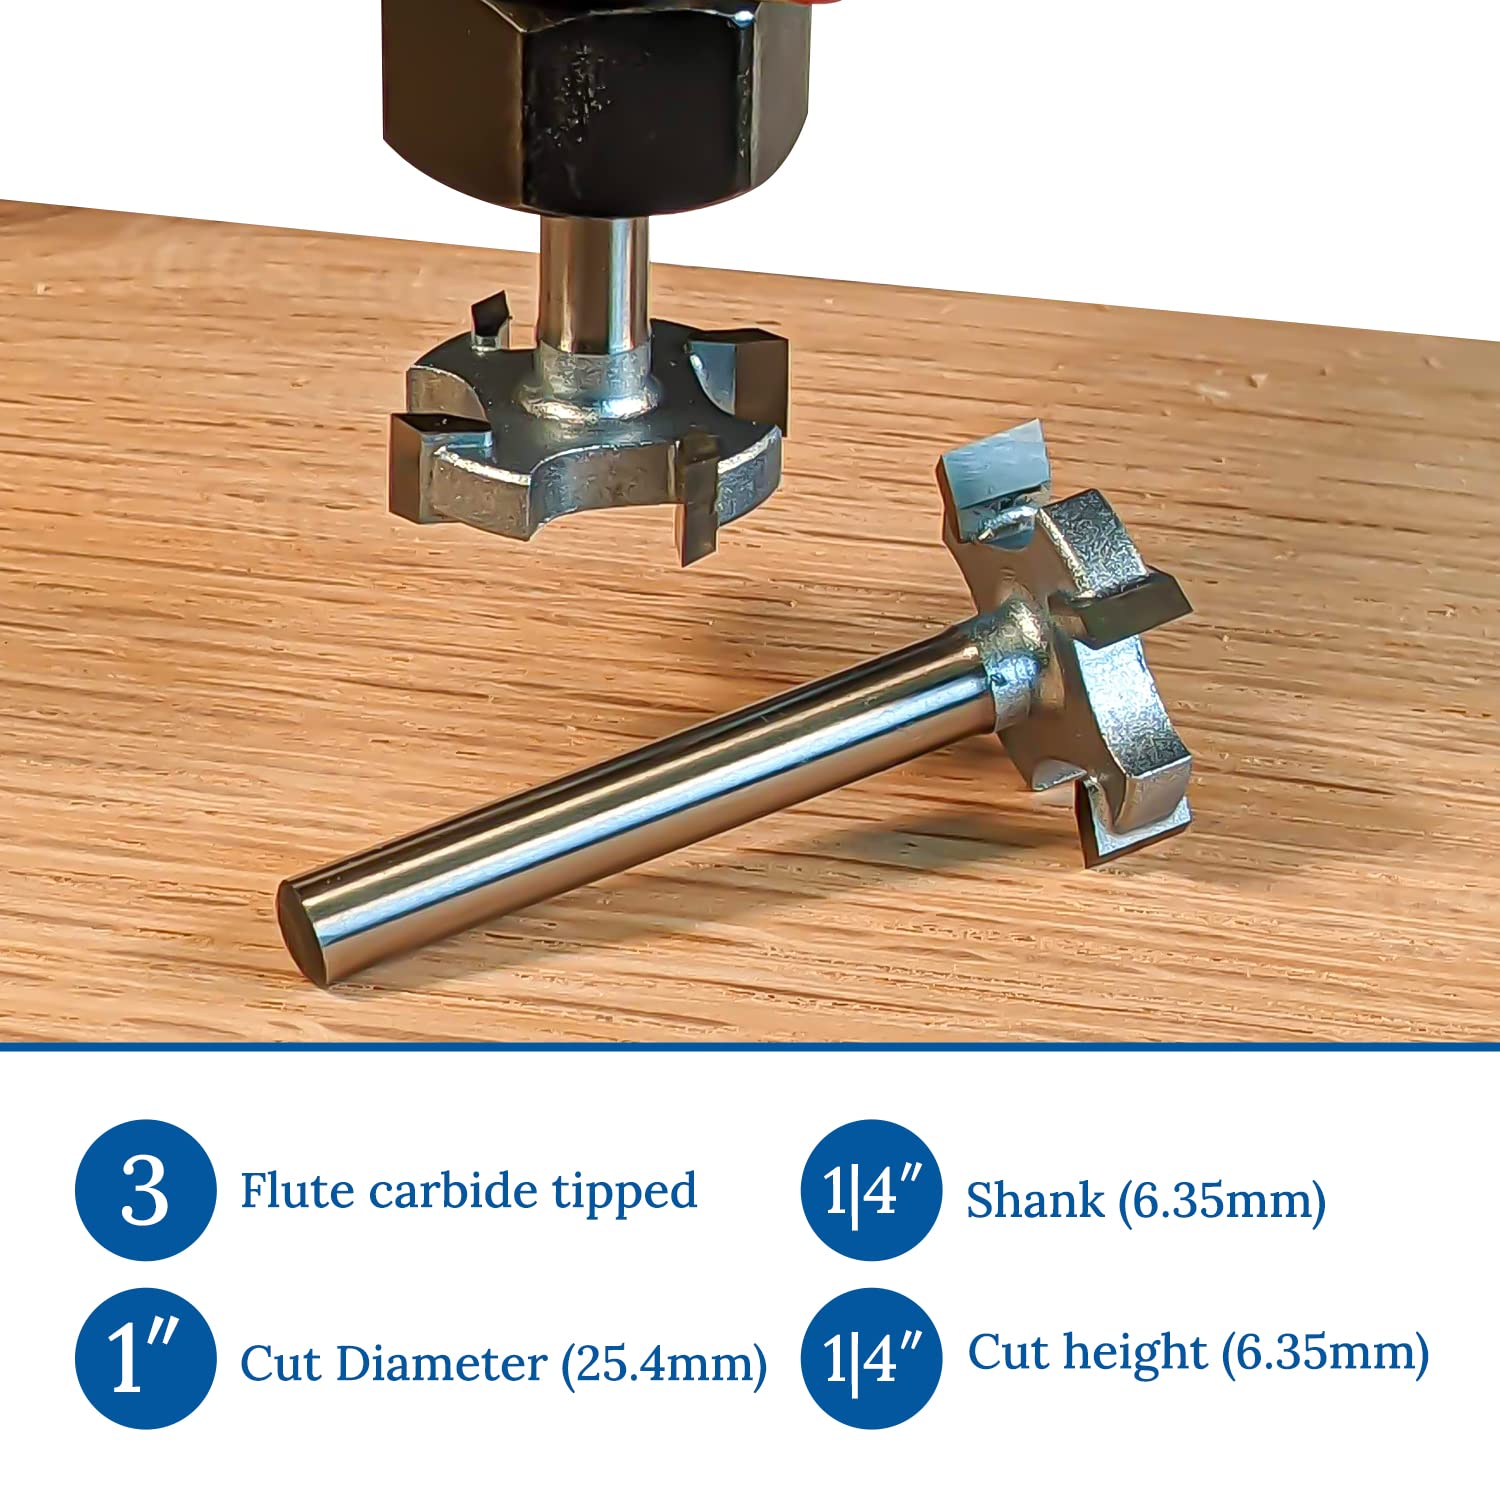 IDC WoodCraft 1" Surfacing CNC Router Bit for Spoilboard, Slab Flattening, Wood Surfacing, Resurfacing Spoil Board - 1" Cutting Diameter, 1/4" Shank, Carbide Tipped - Extra Smooth Woodworking